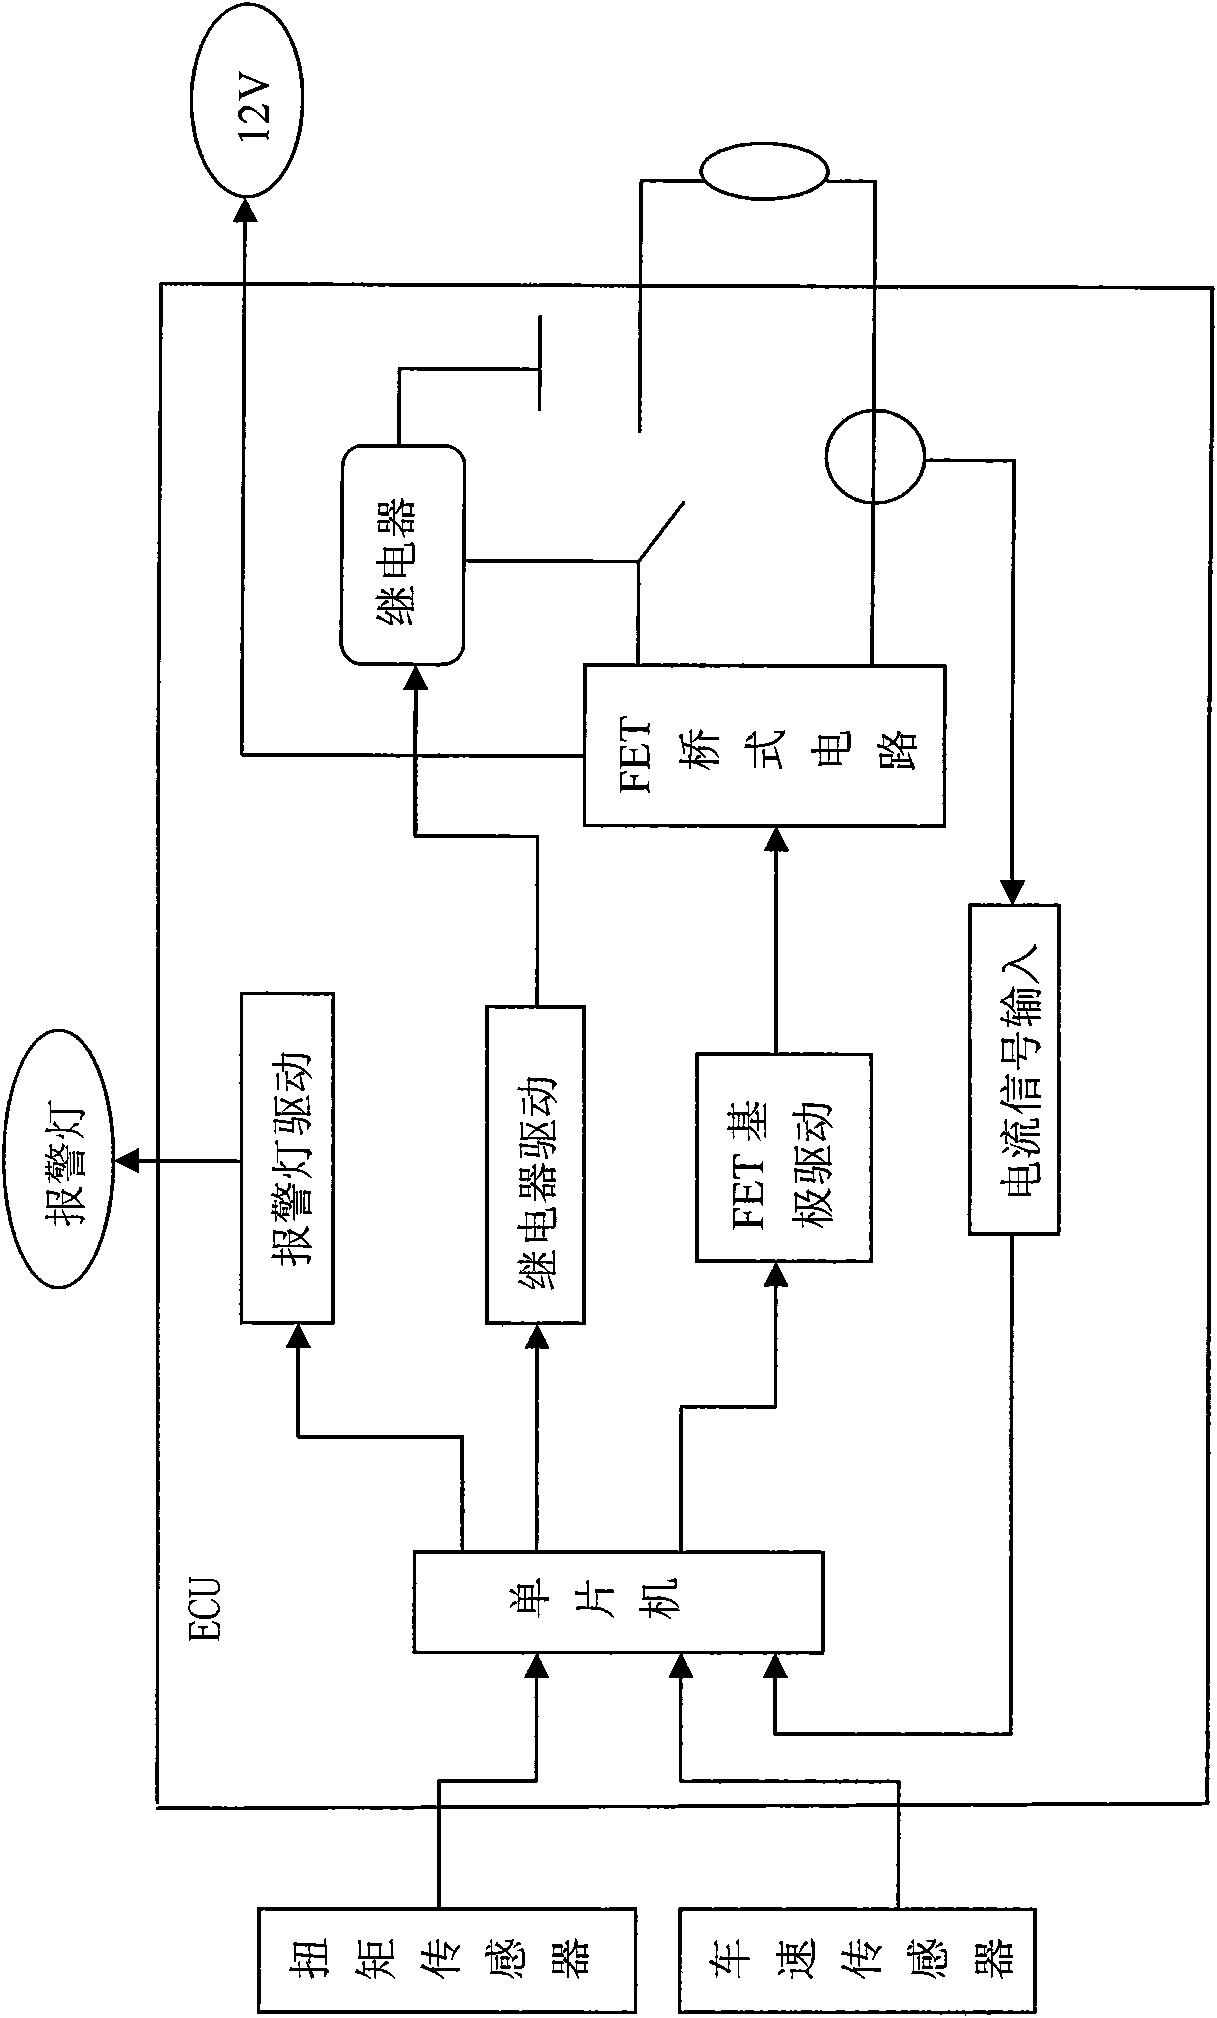 Auto steering control method and system based on magnetorheological technique